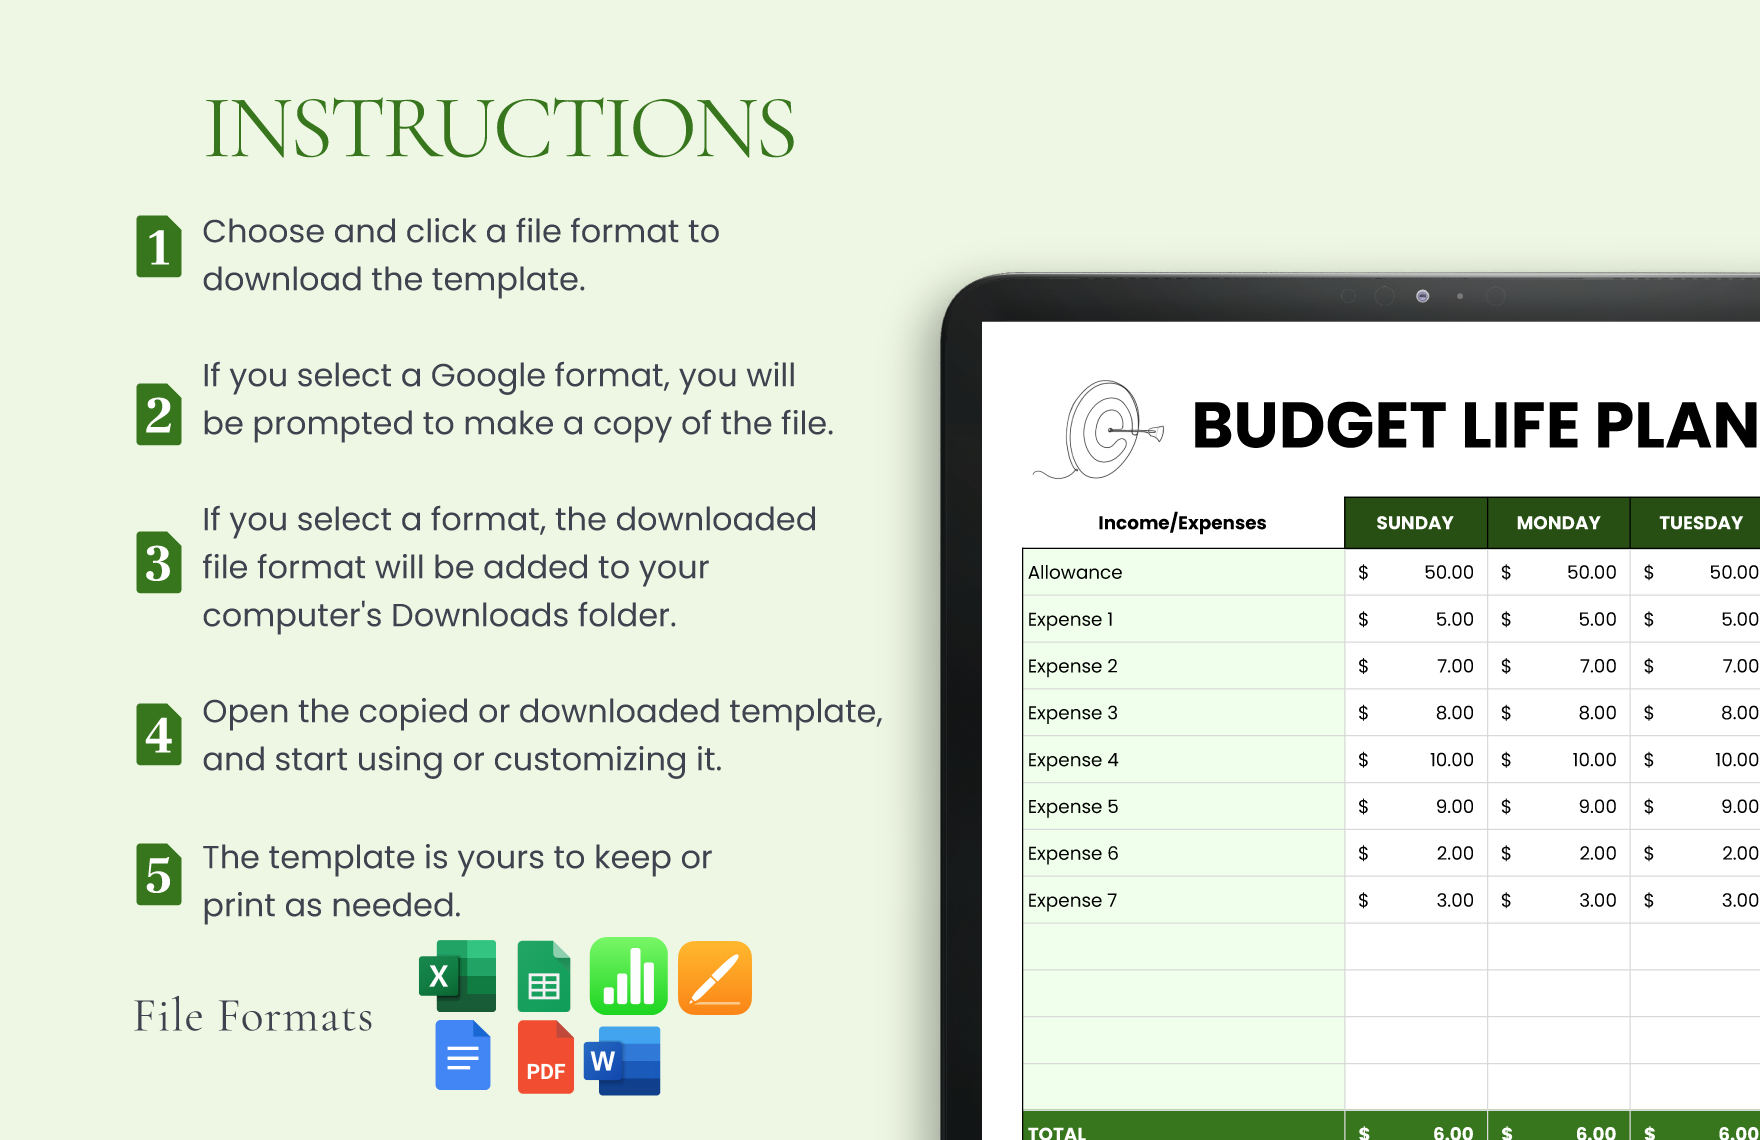 Budget Life Planner Template